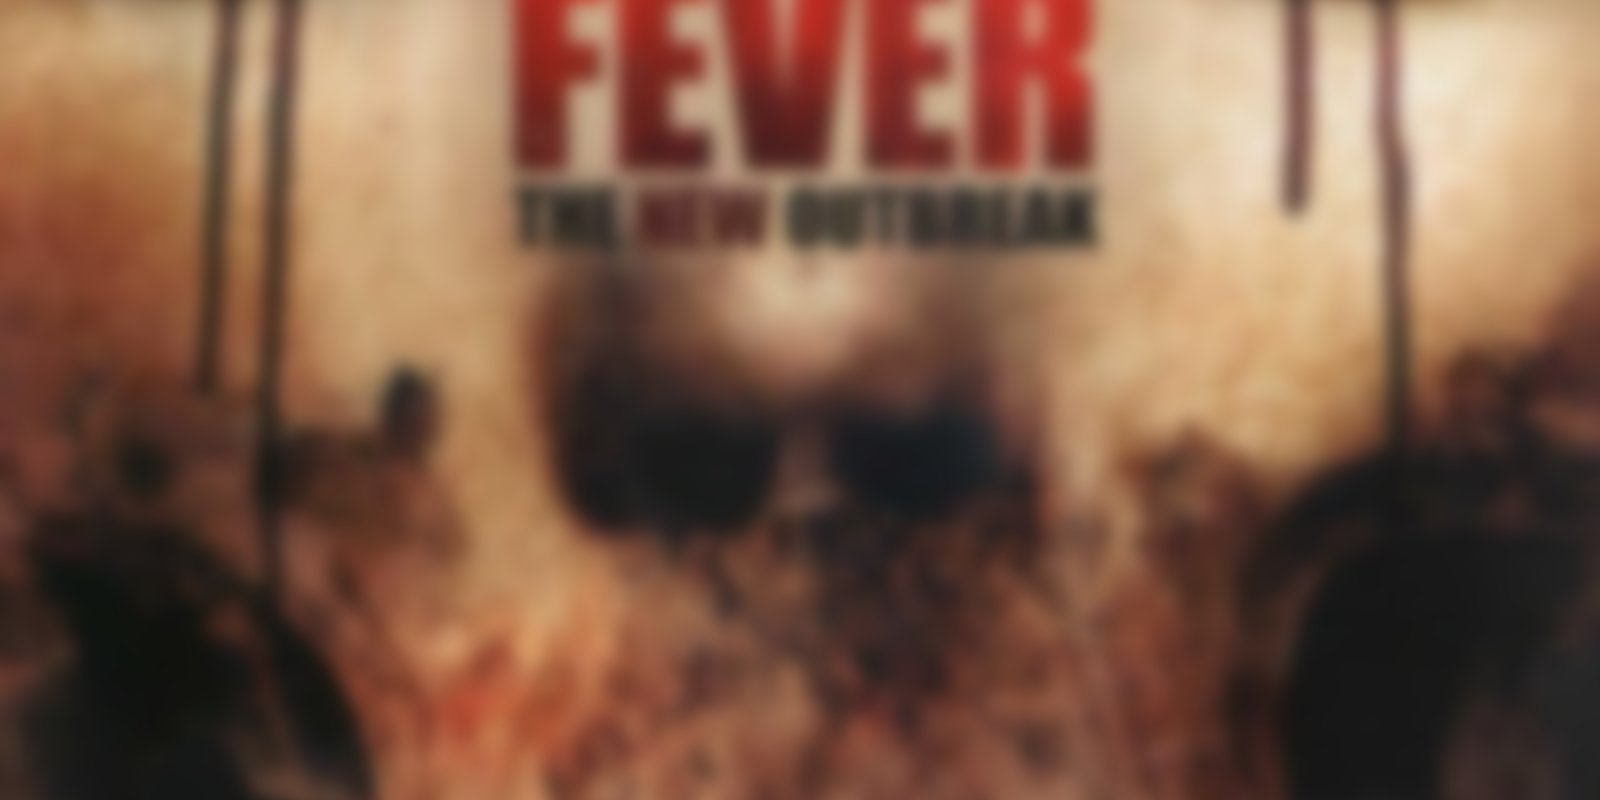 Cabin Fever - The New Outbreak